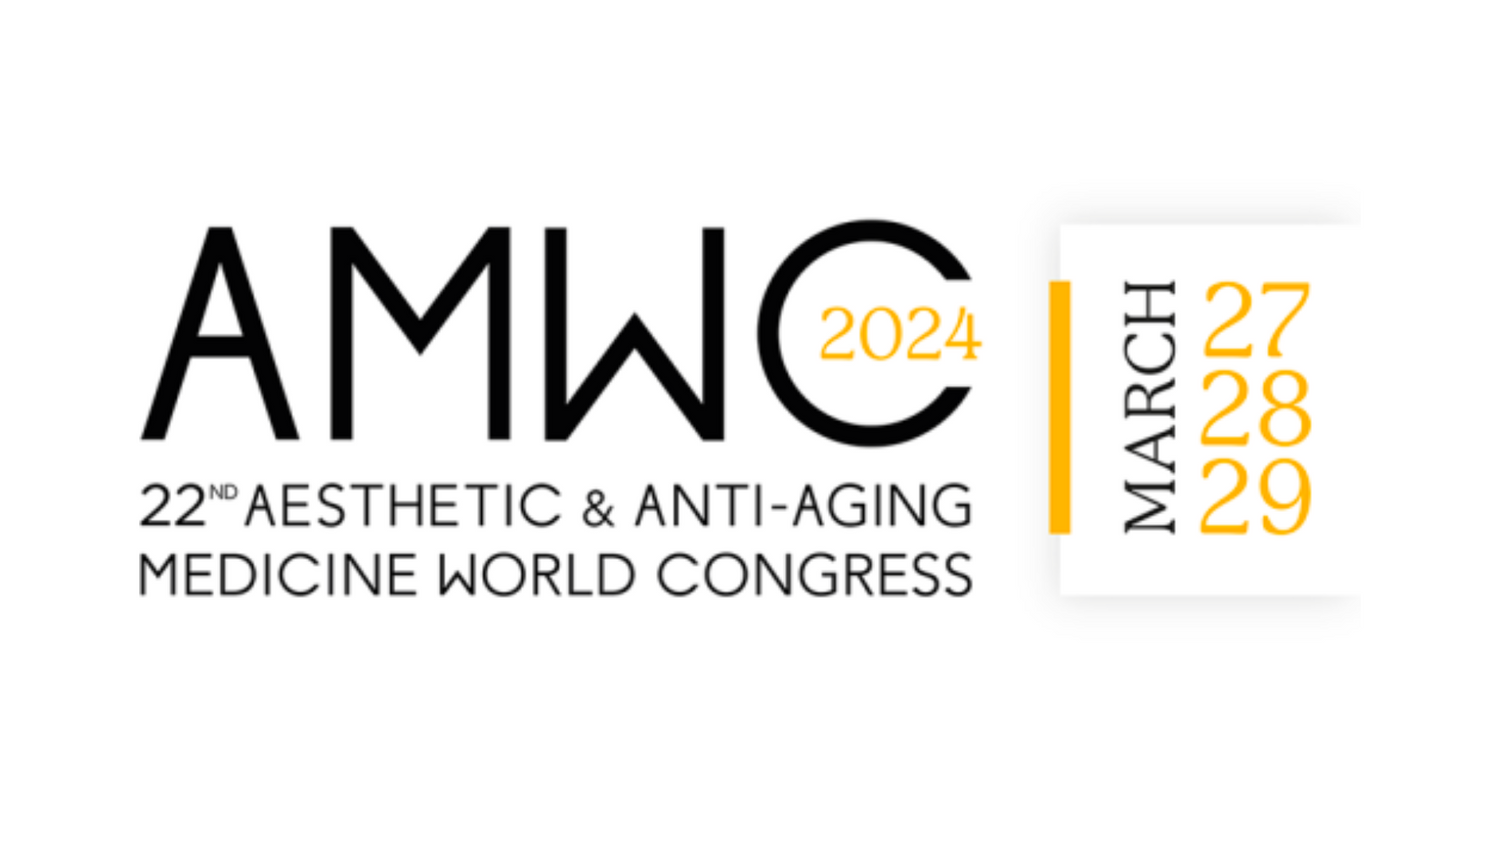 Aesthetic and Anti-Aging Medicine World Congress.